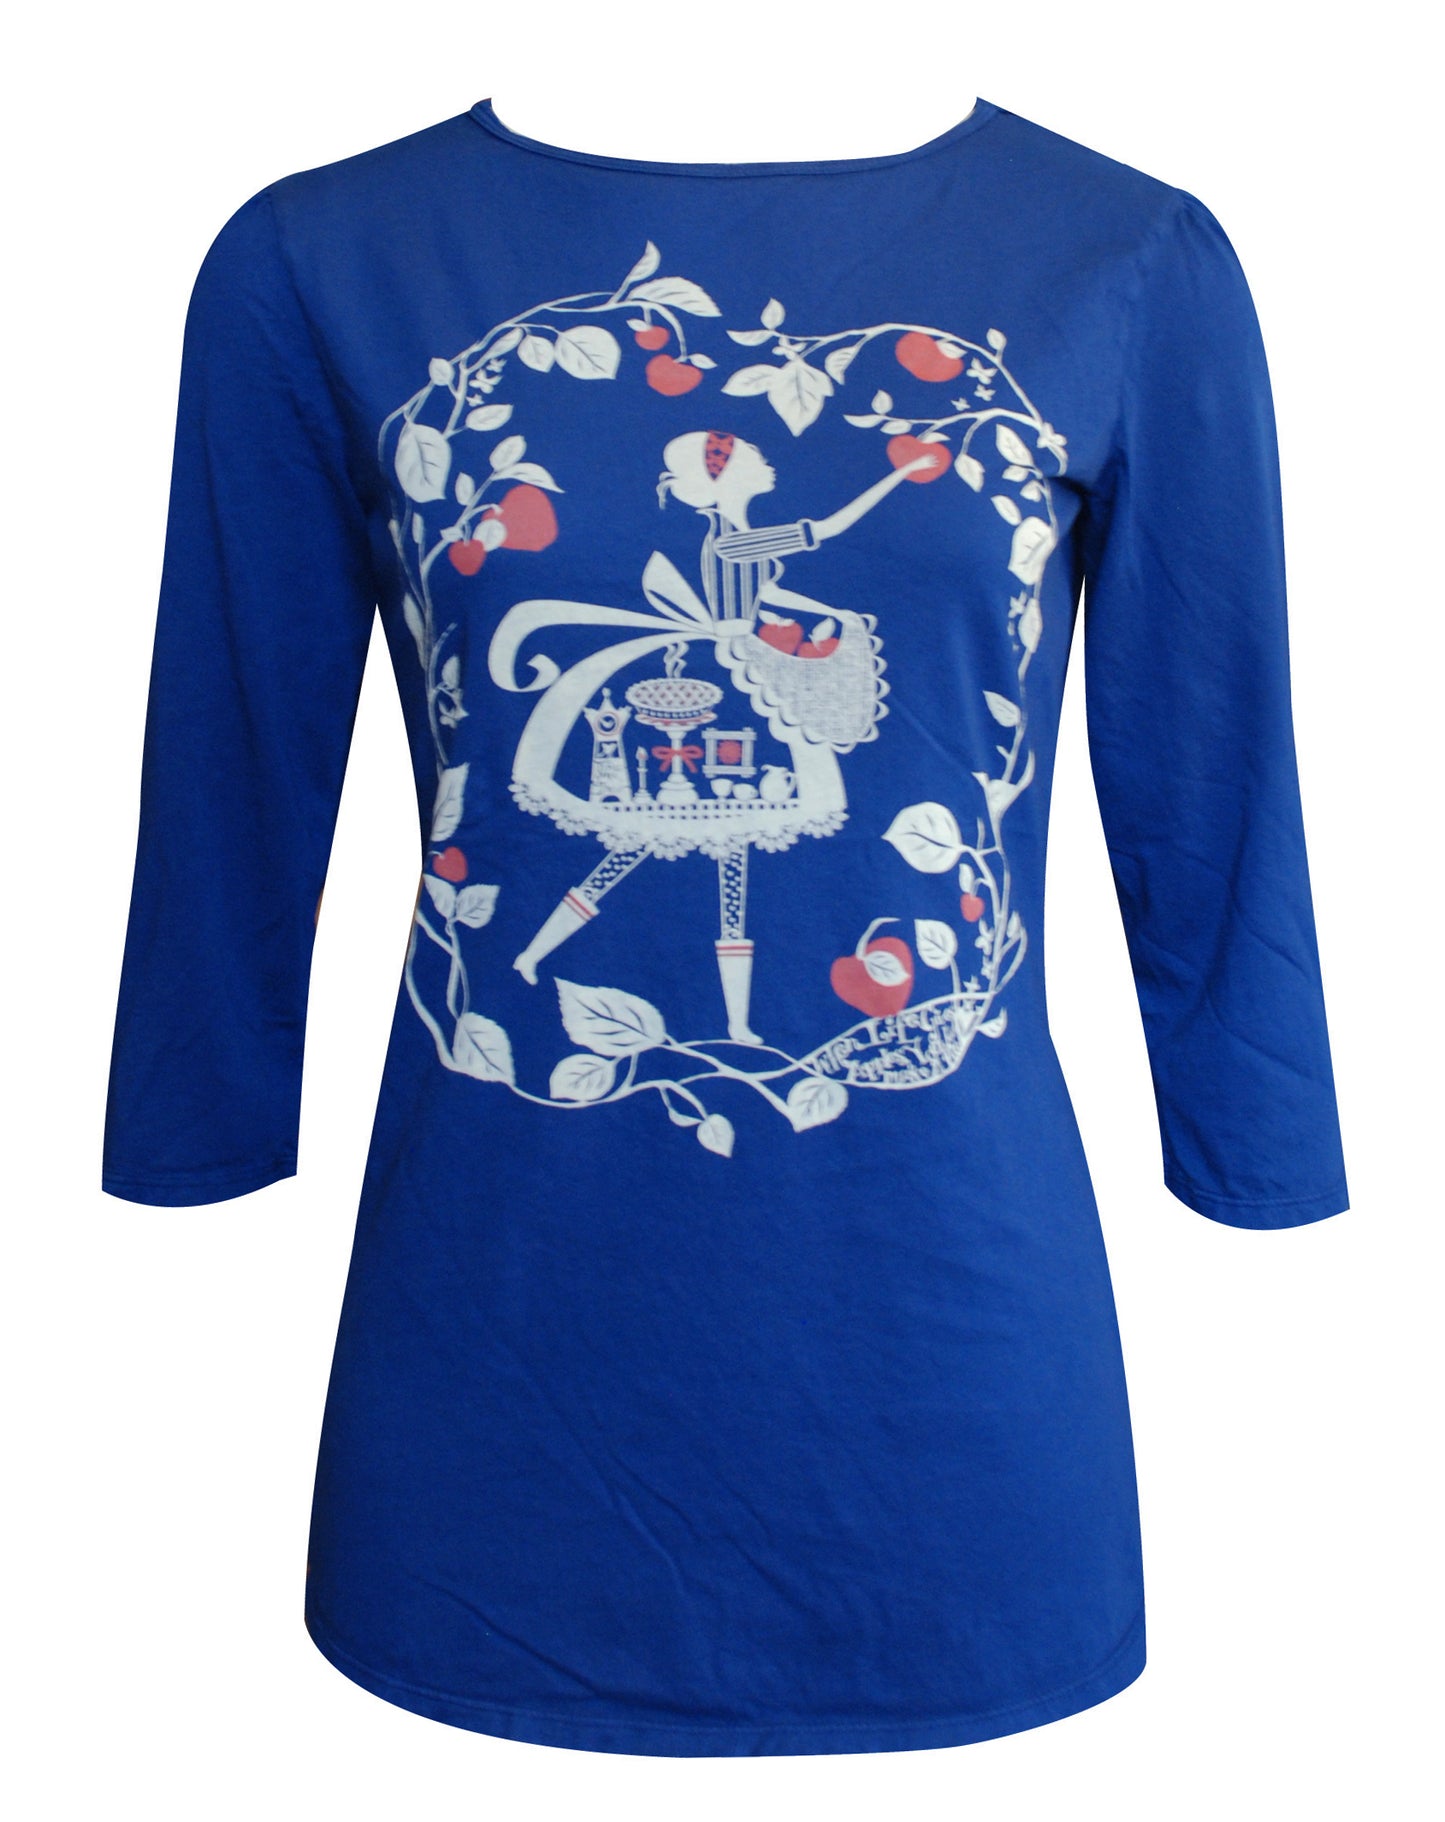 Navy blue 3/4 sleeve tee with print of an apple picking girl and red apples